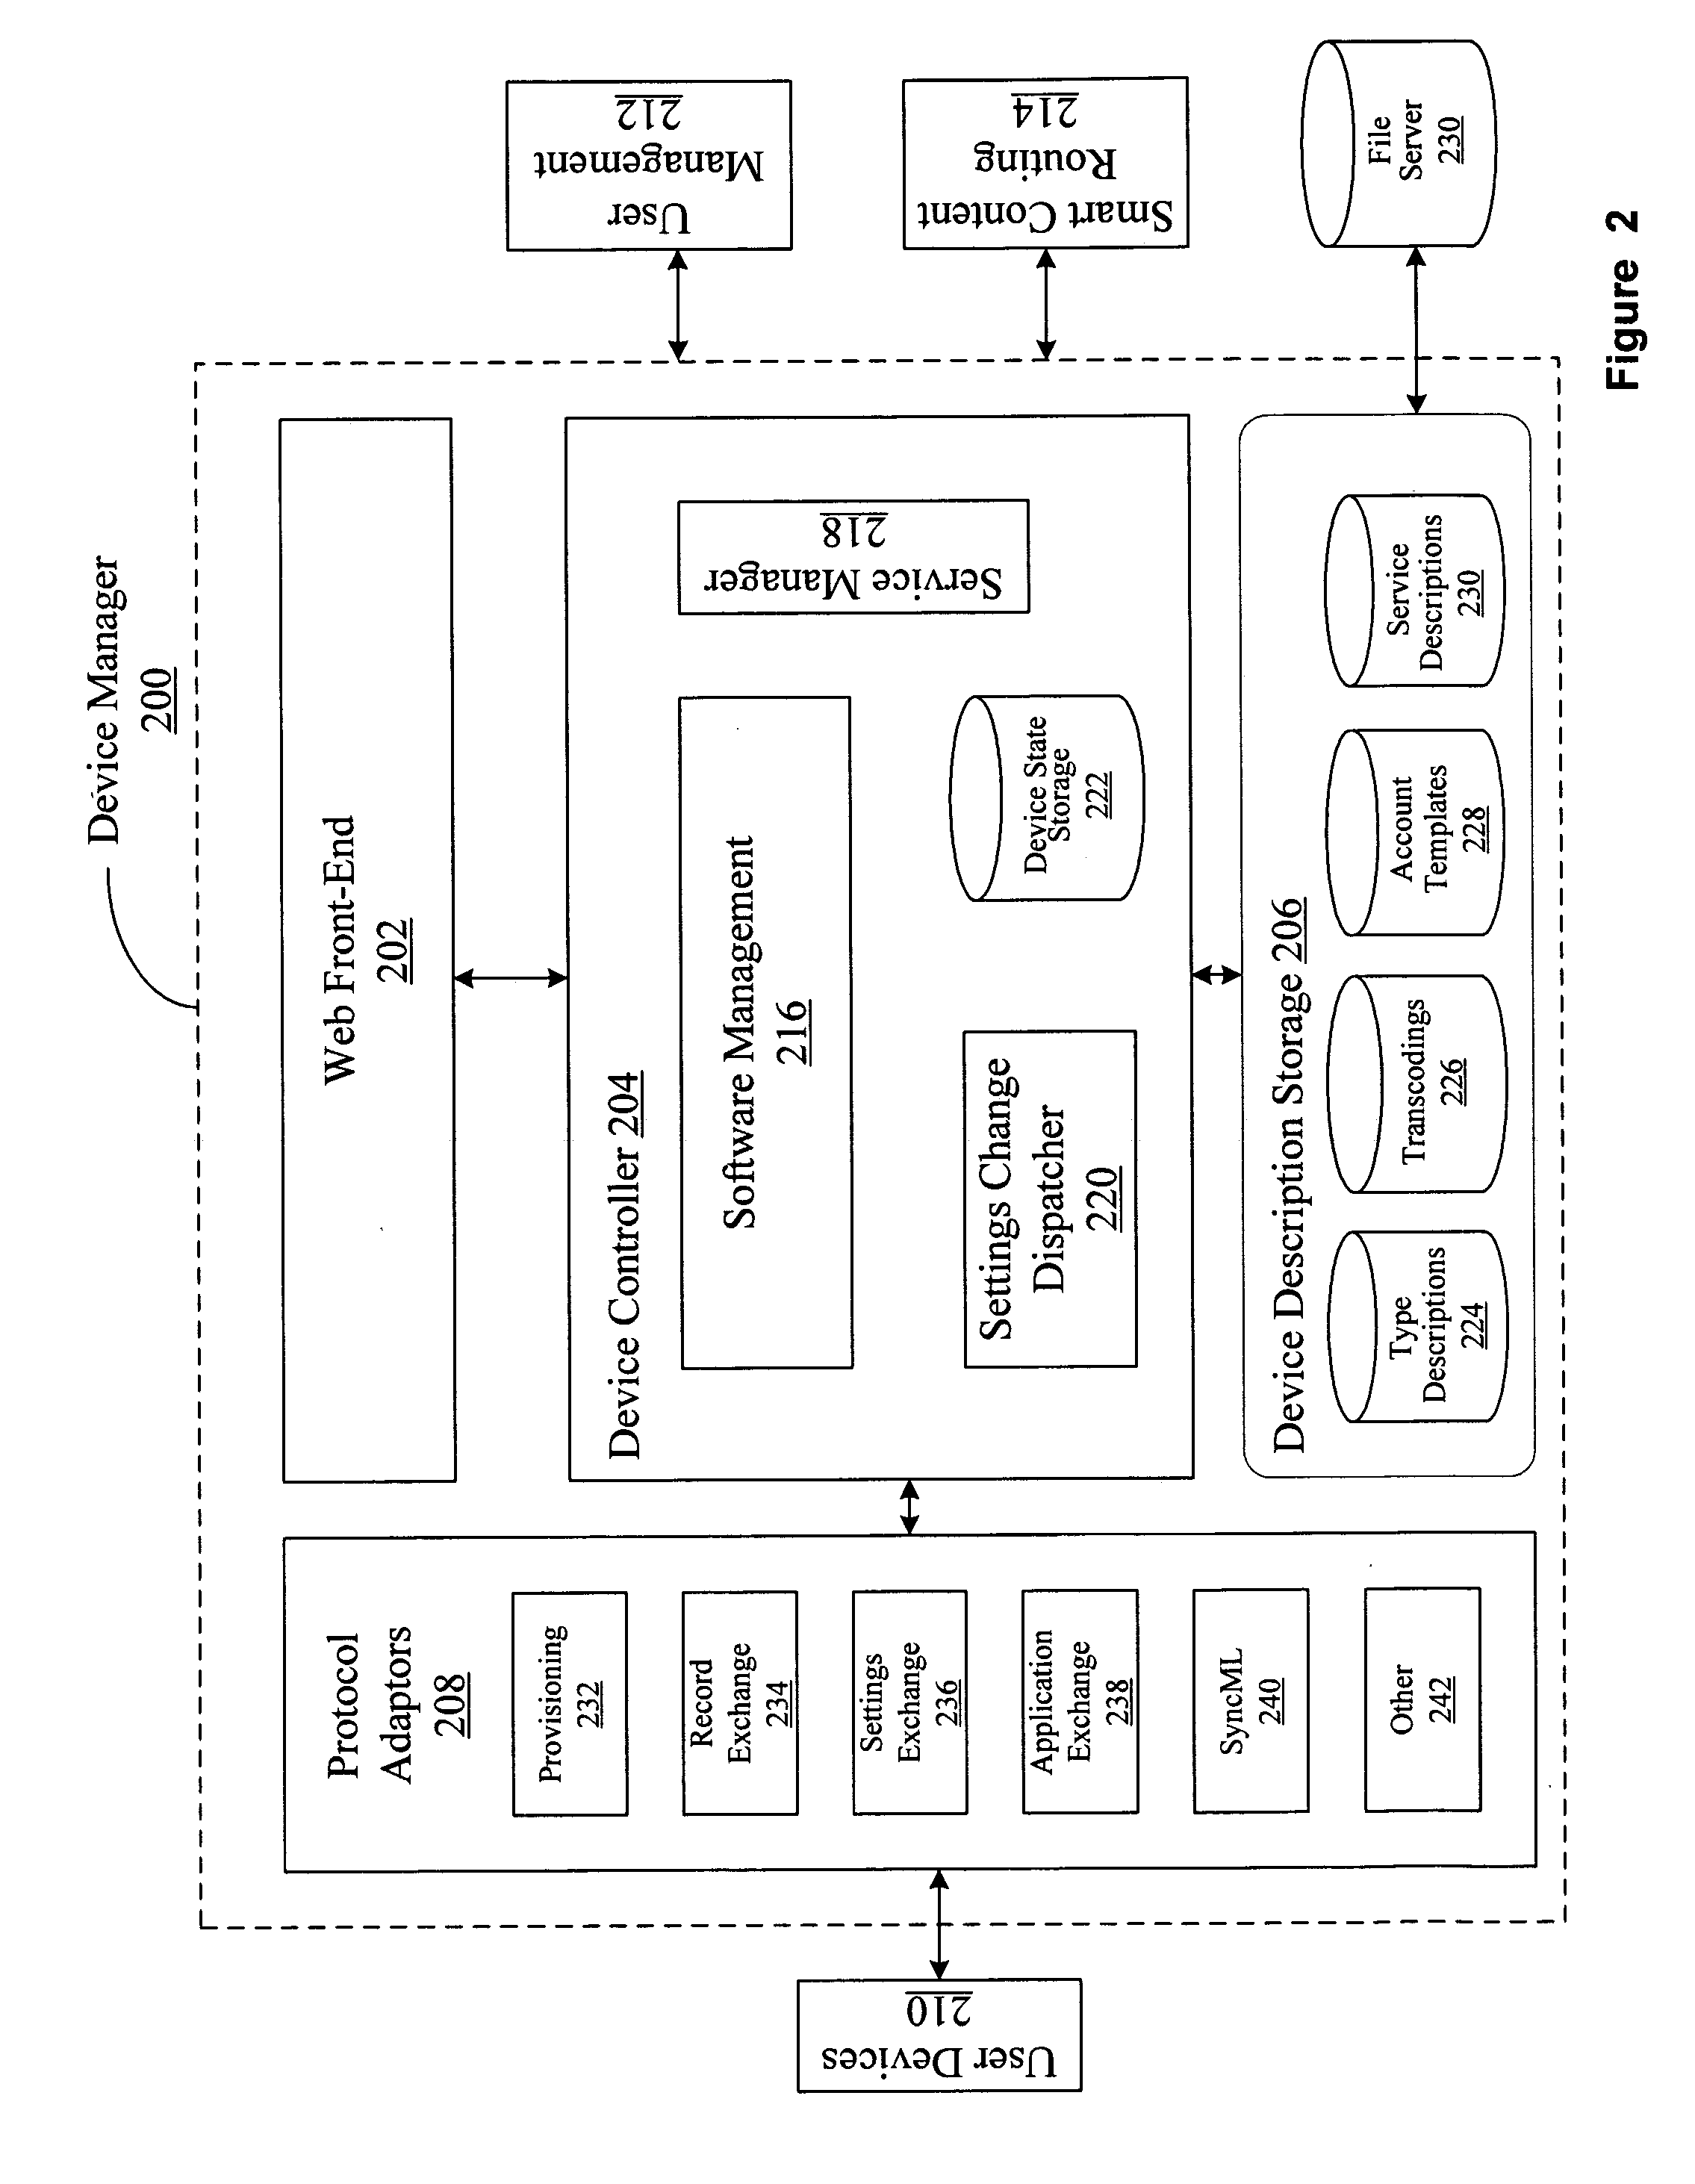 System and method for servicing a user device